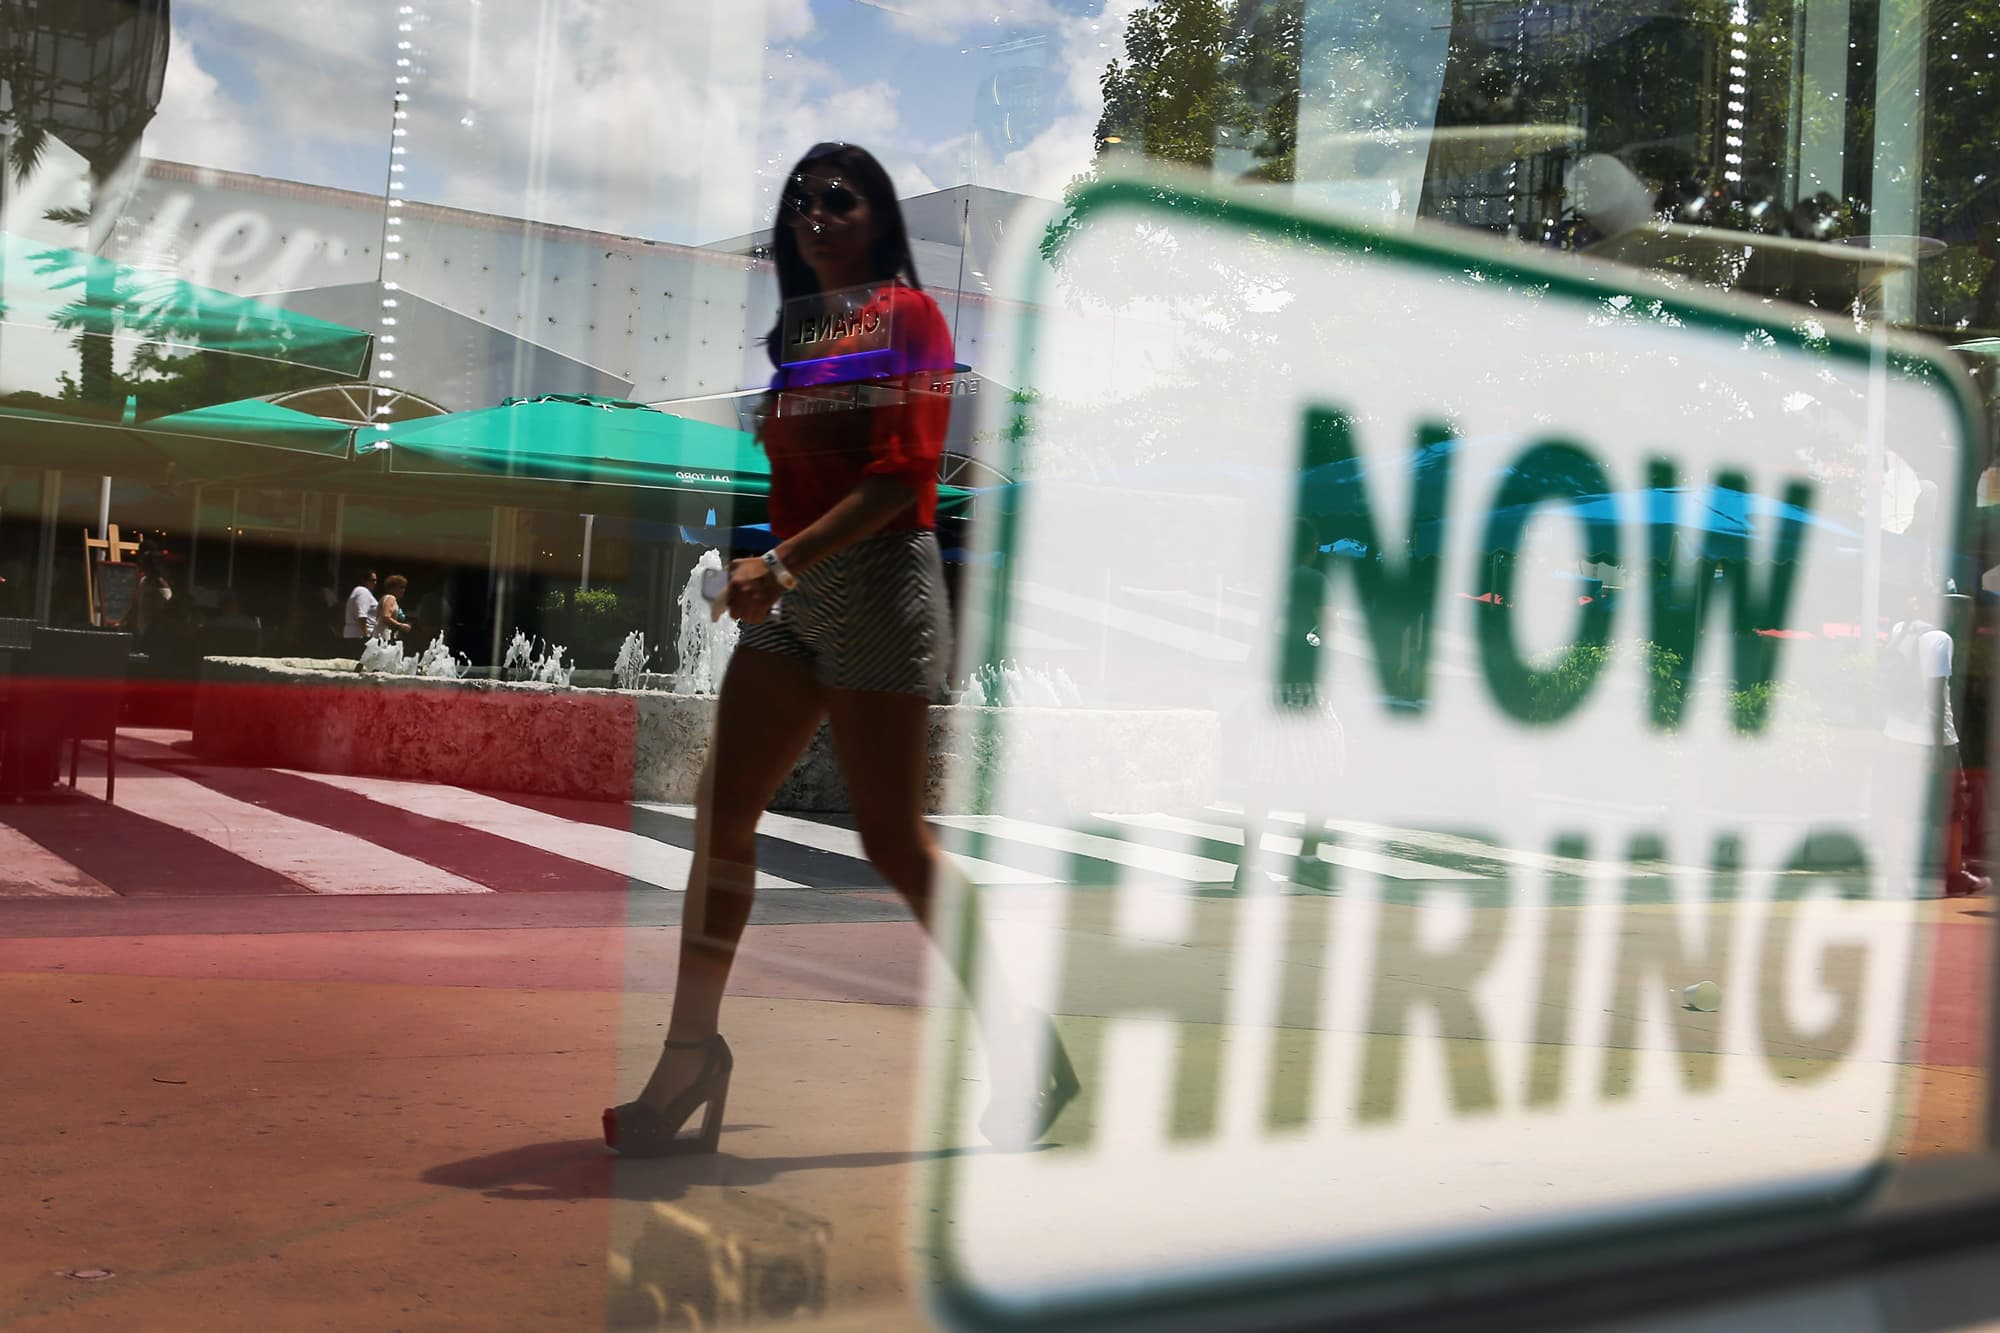 Jobless claims hit new pandemic low, while New York manufacturing notches record high